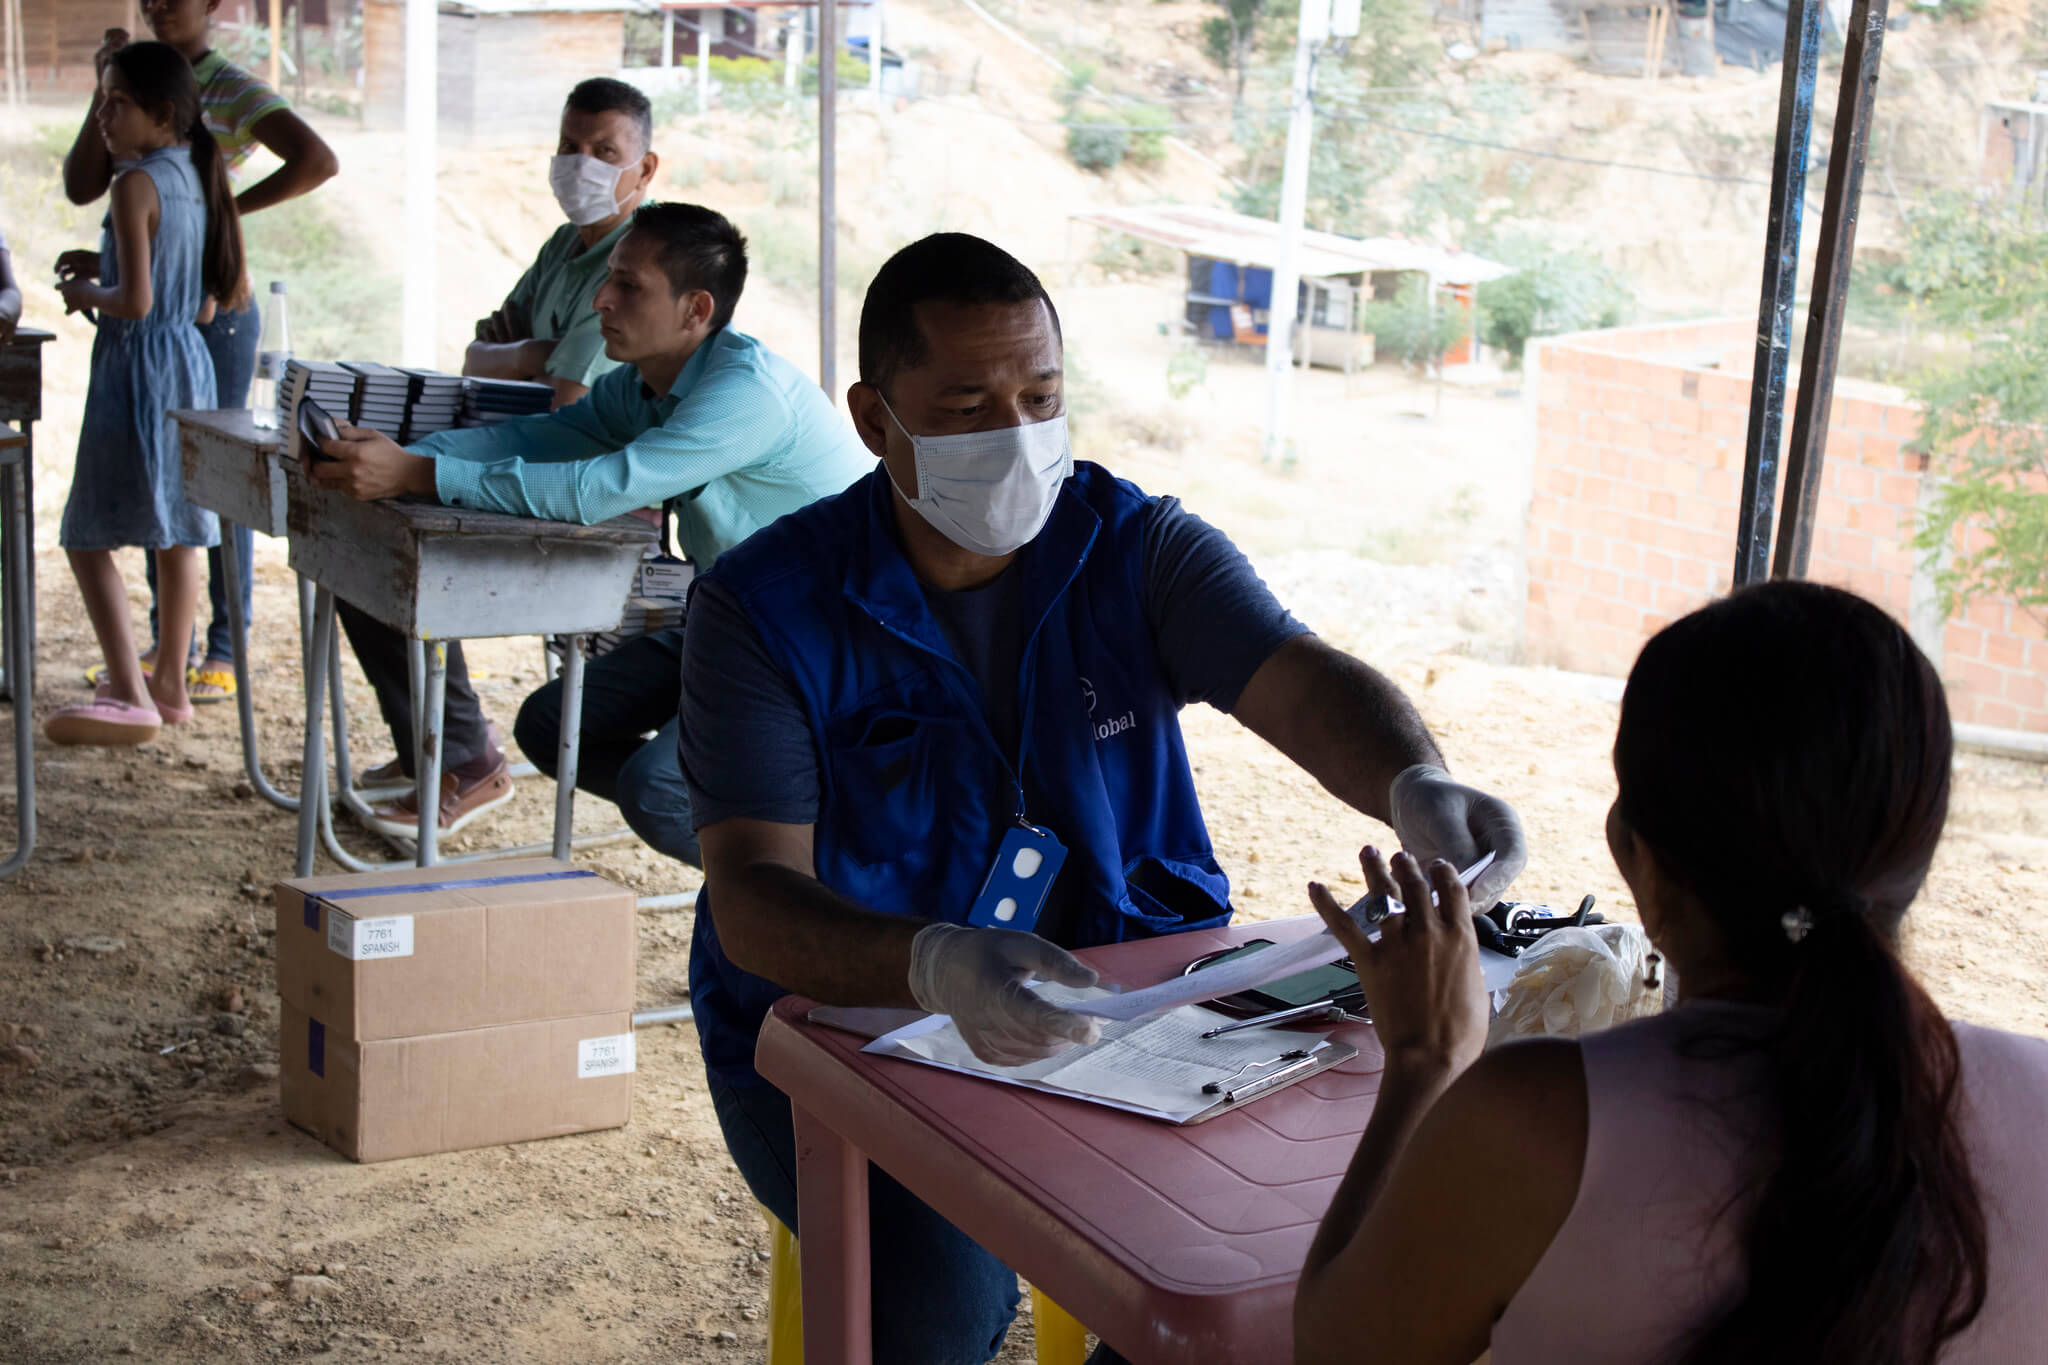 In March 2020, ngo MedGlobal conducted a medical brigade in Cúcuta, Colombia, a border city that has become an epicenter of Venezuelan migration. MedGloba